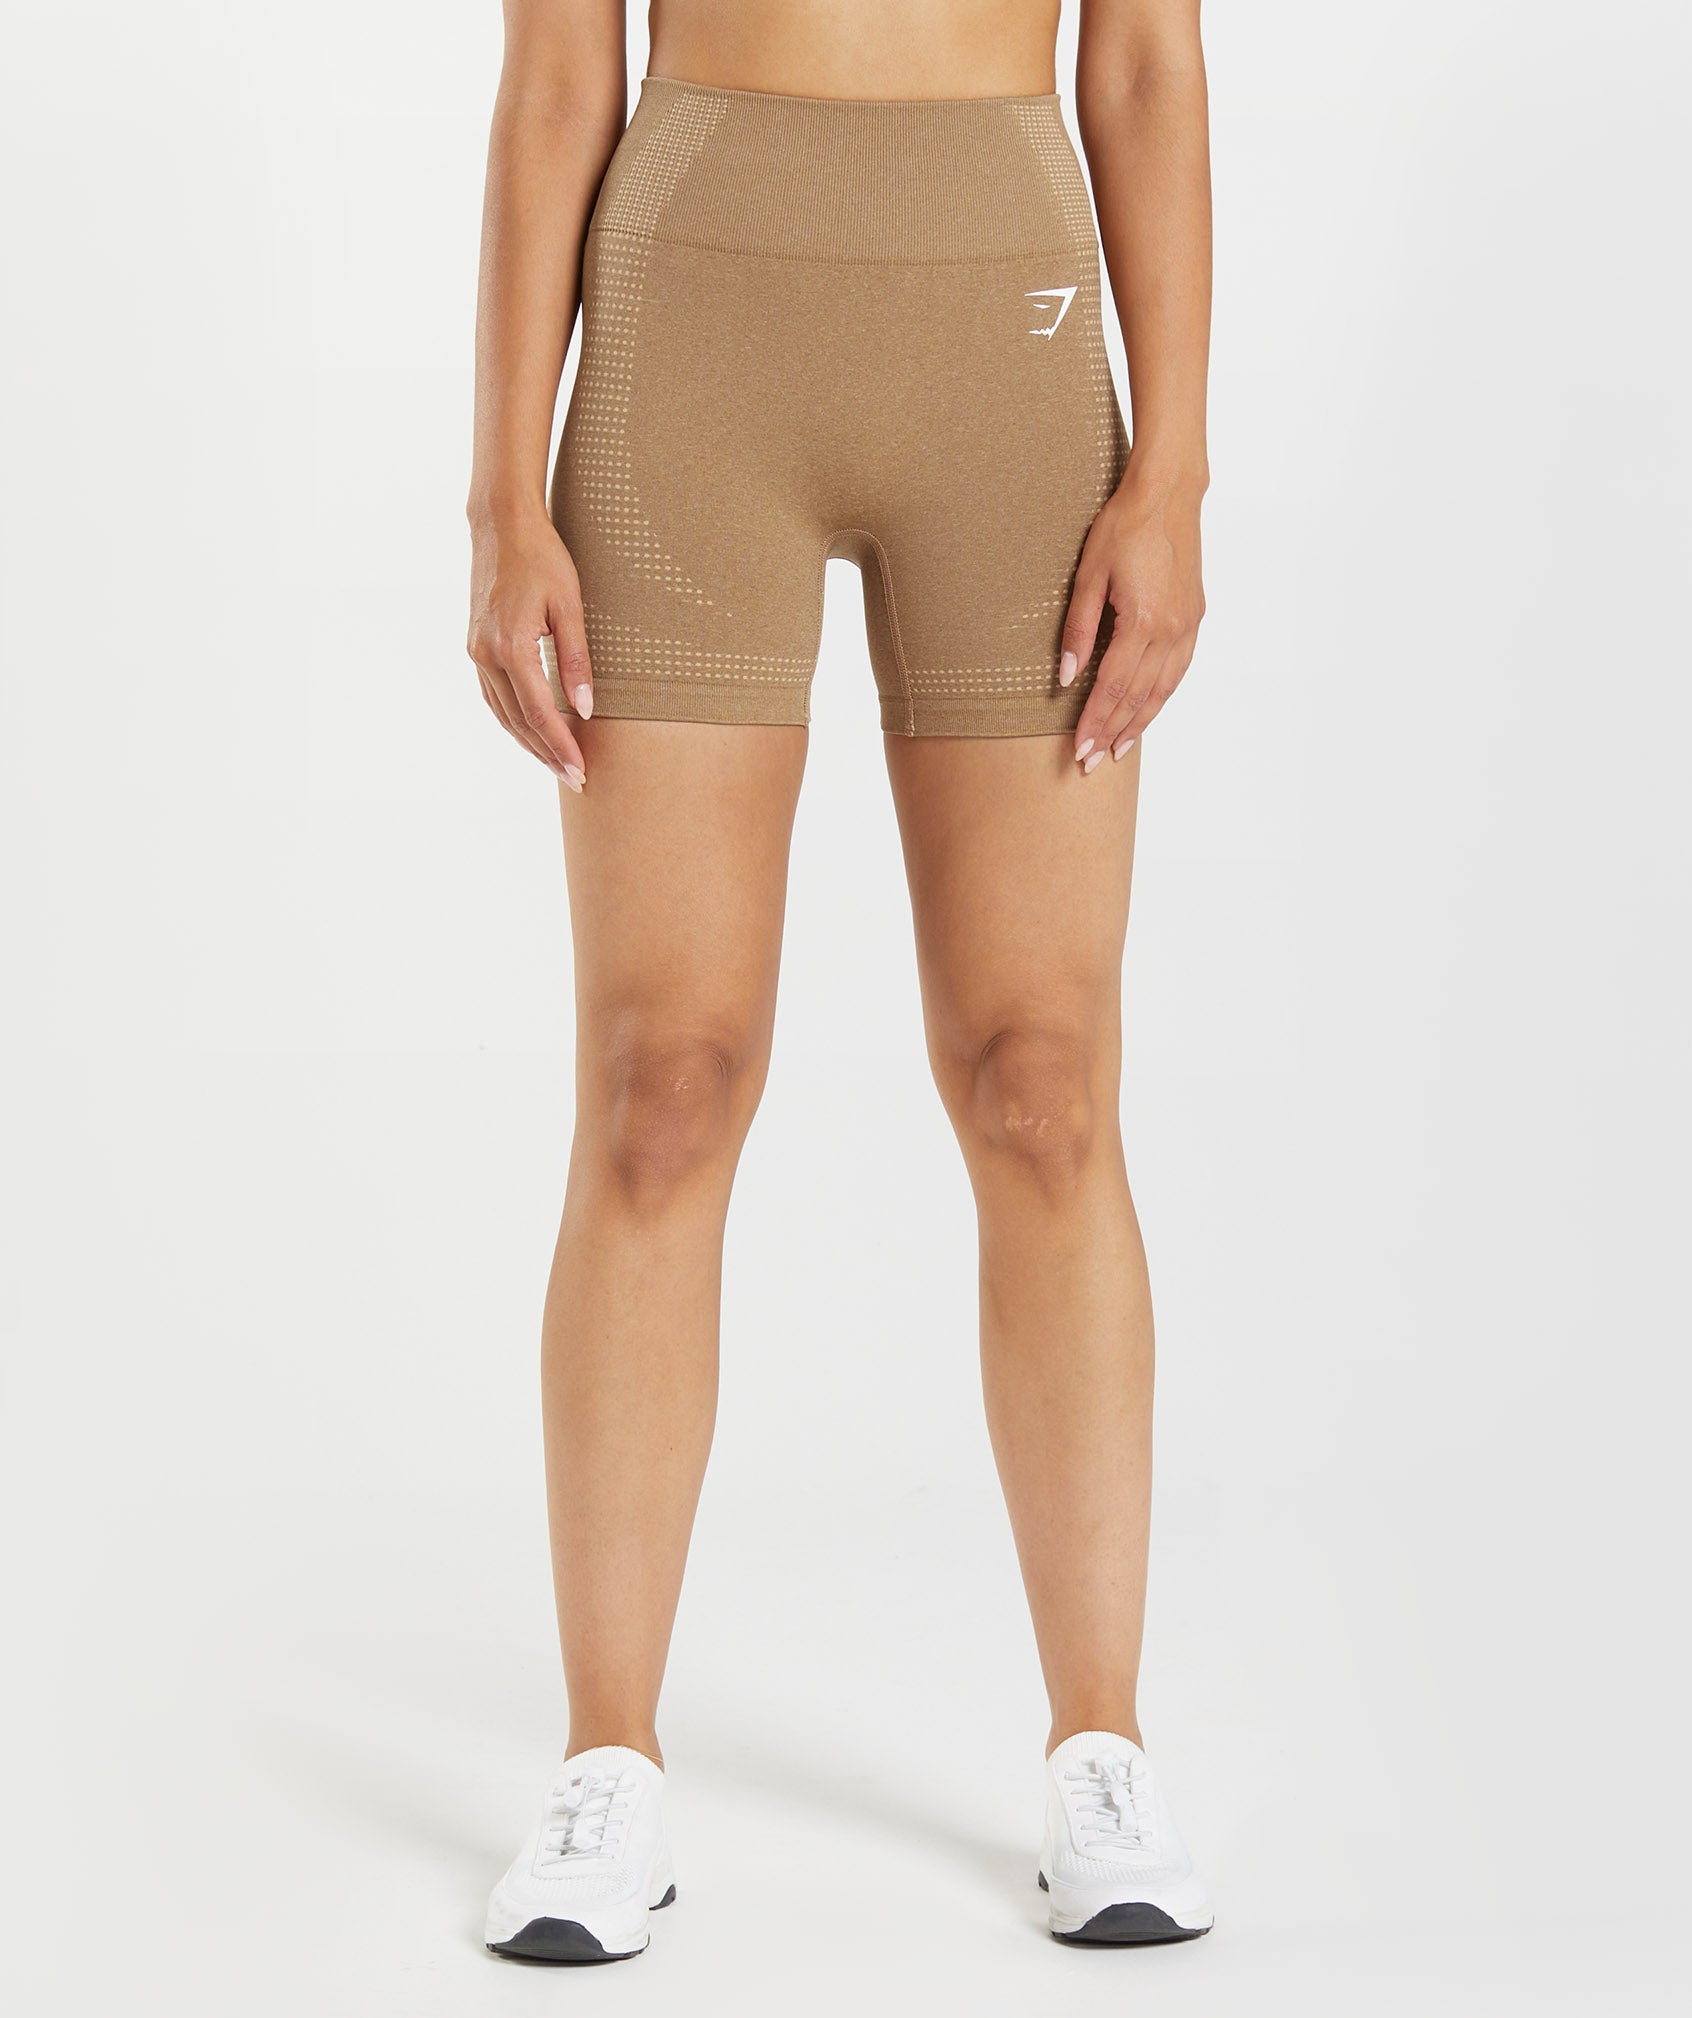 Vital Seamless 2.0 Shorts in Fawn Marl - view 2